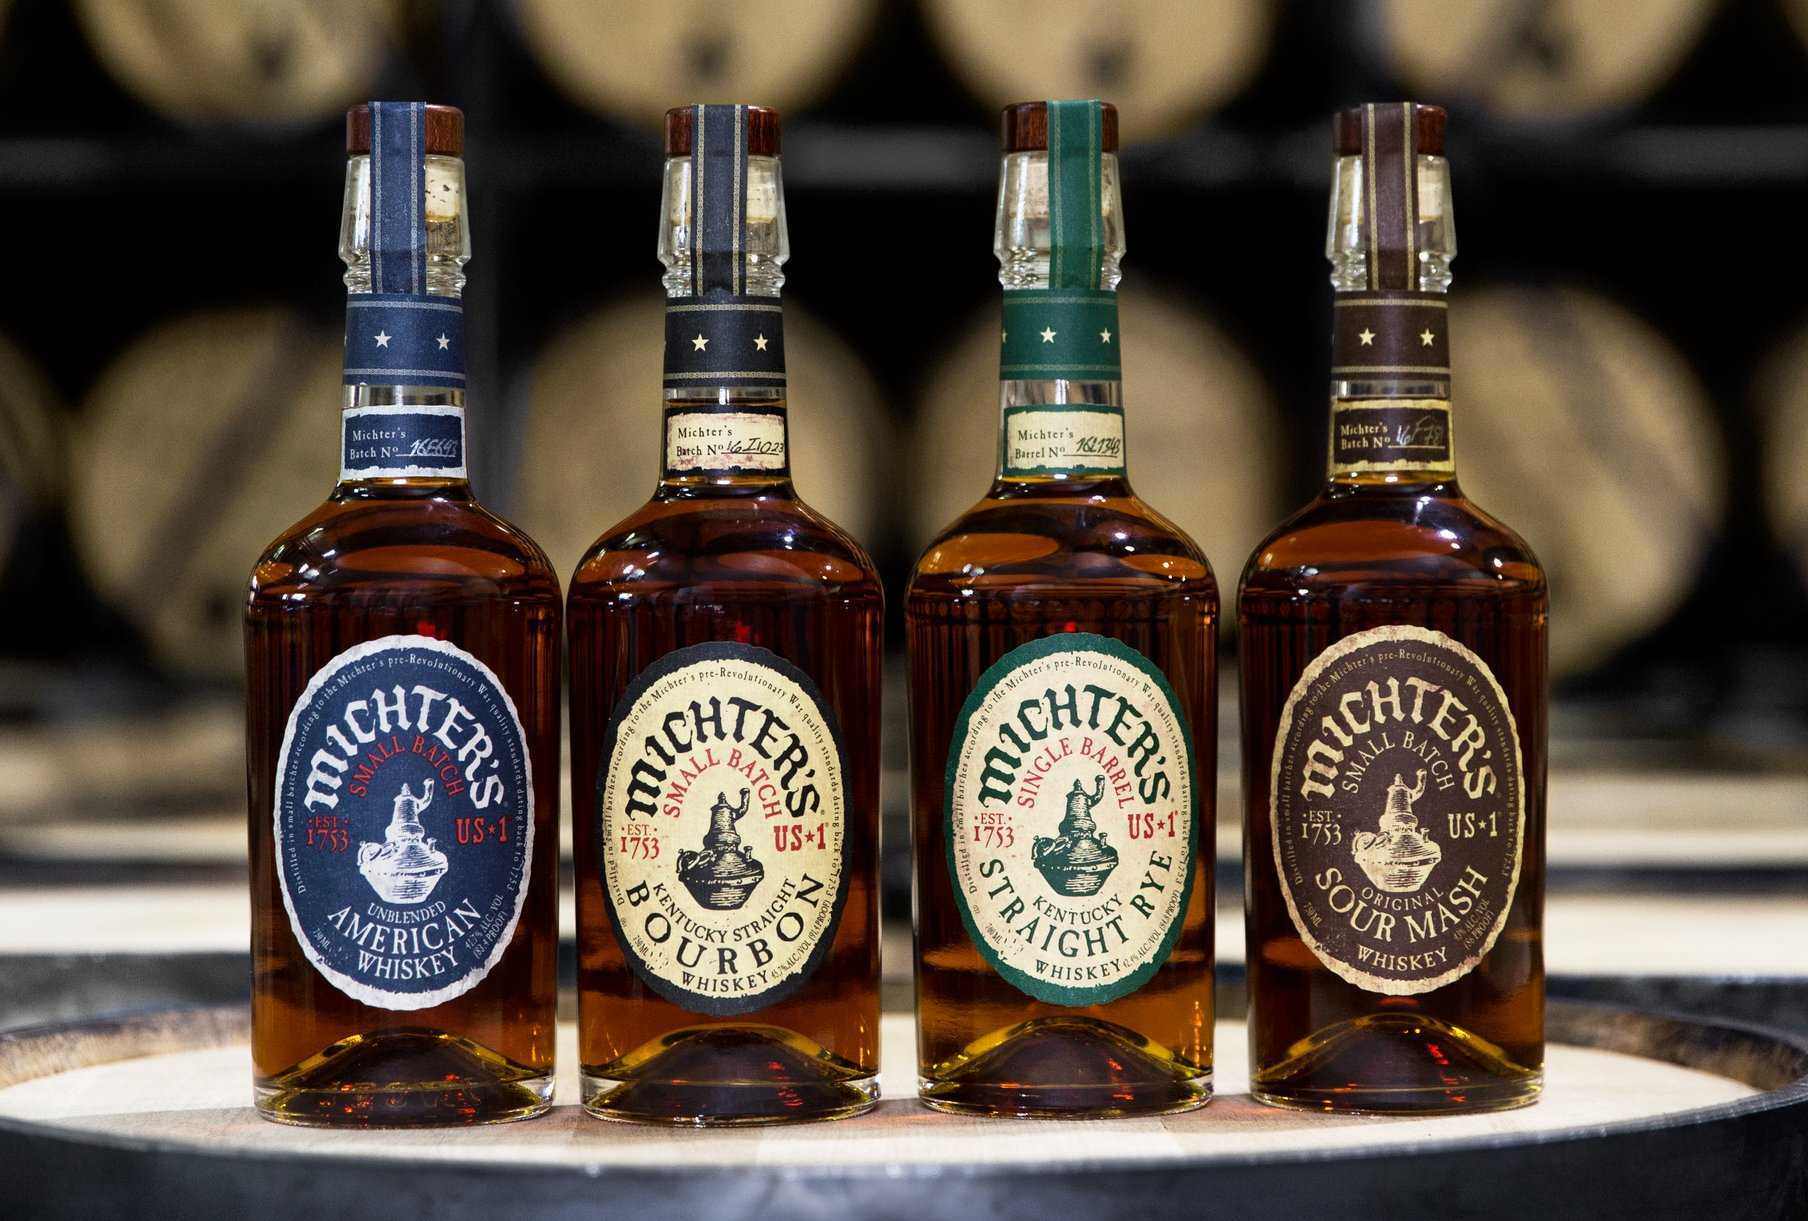 Michter’s is one of the leading American whiskey brands and the top-trending American whiskey according to Drinks International’s Annual Brands Report.